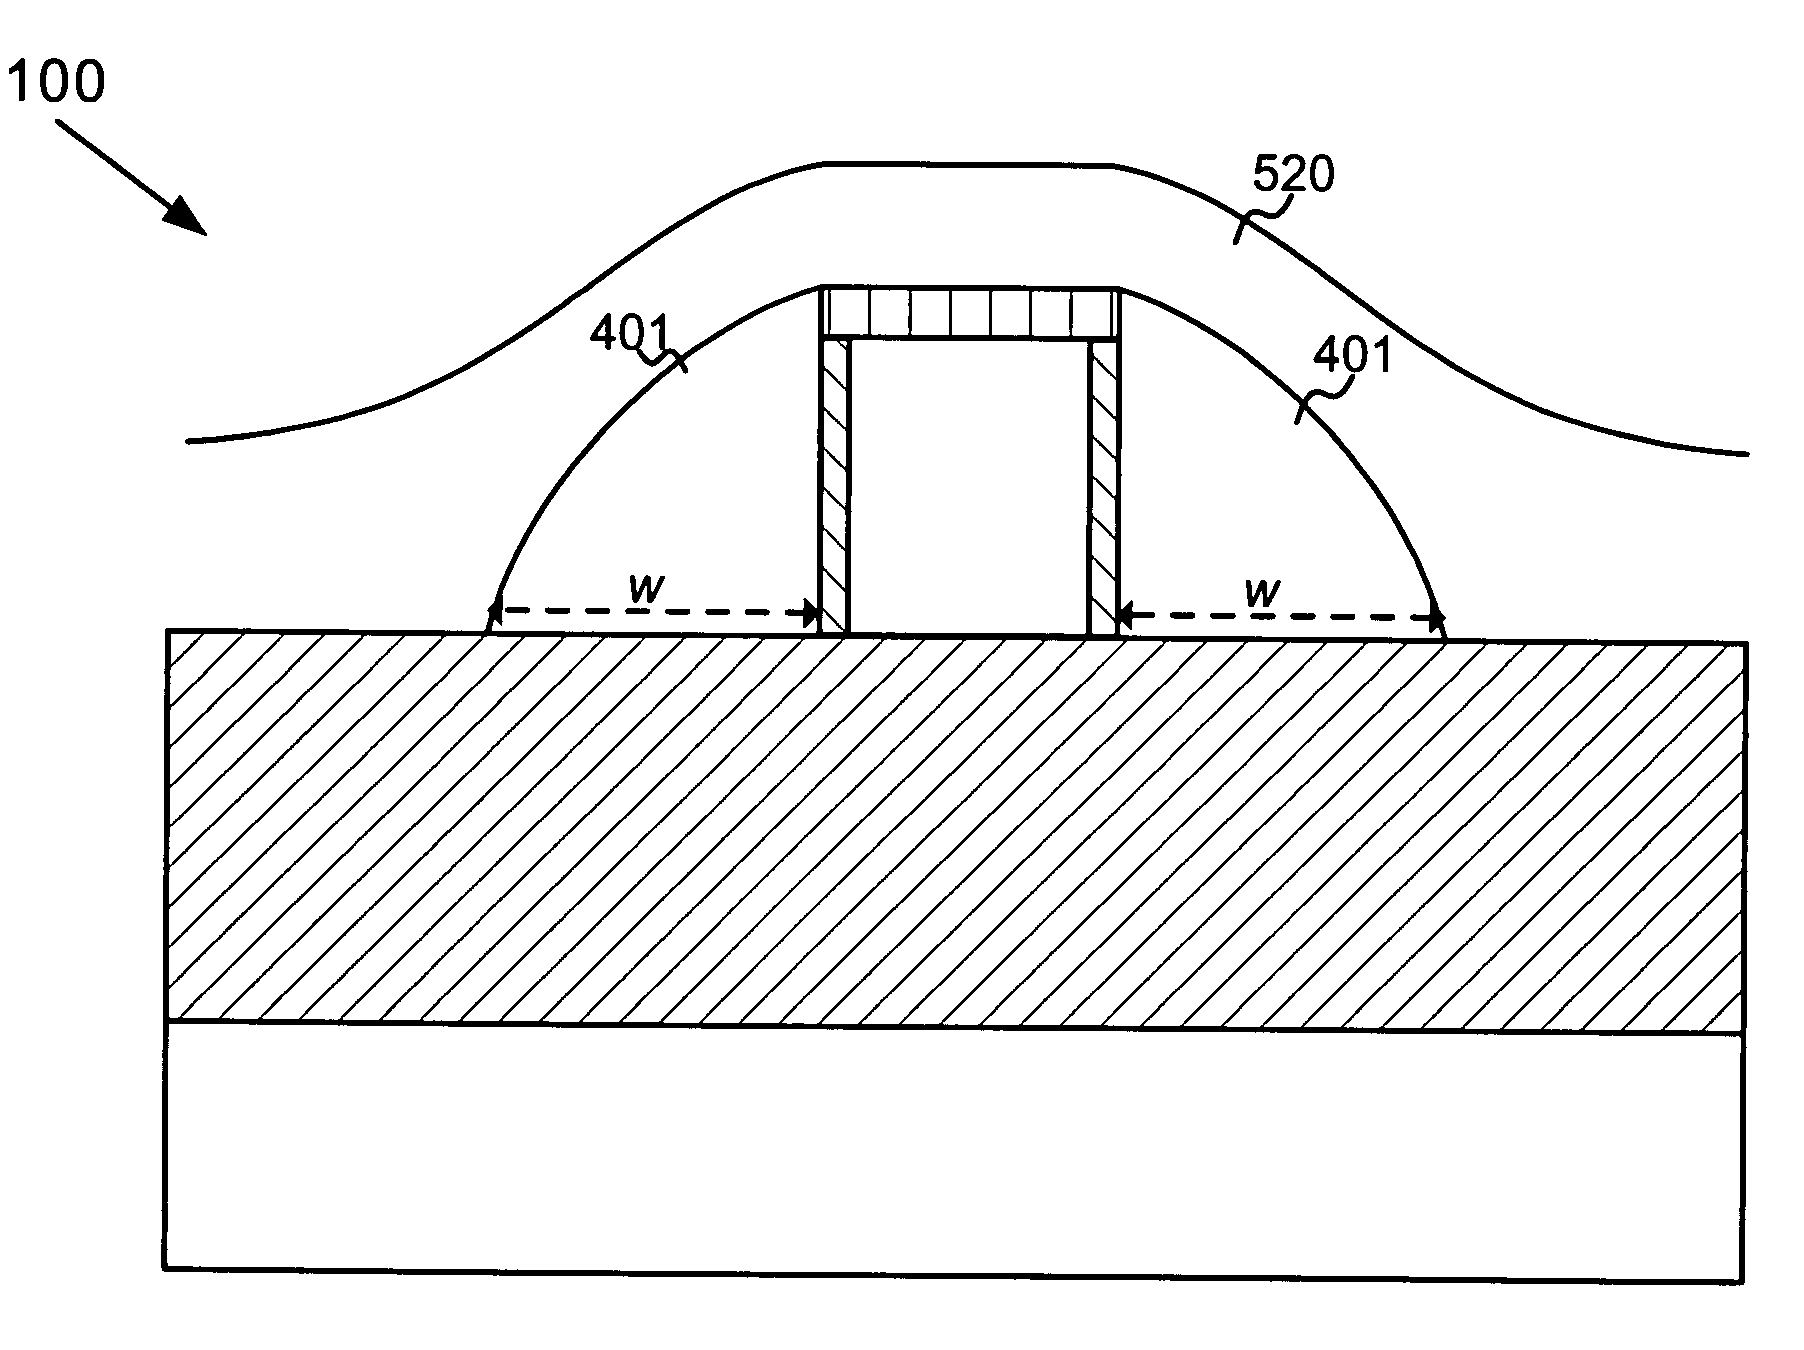 Smooth fin topology in a FinFET device